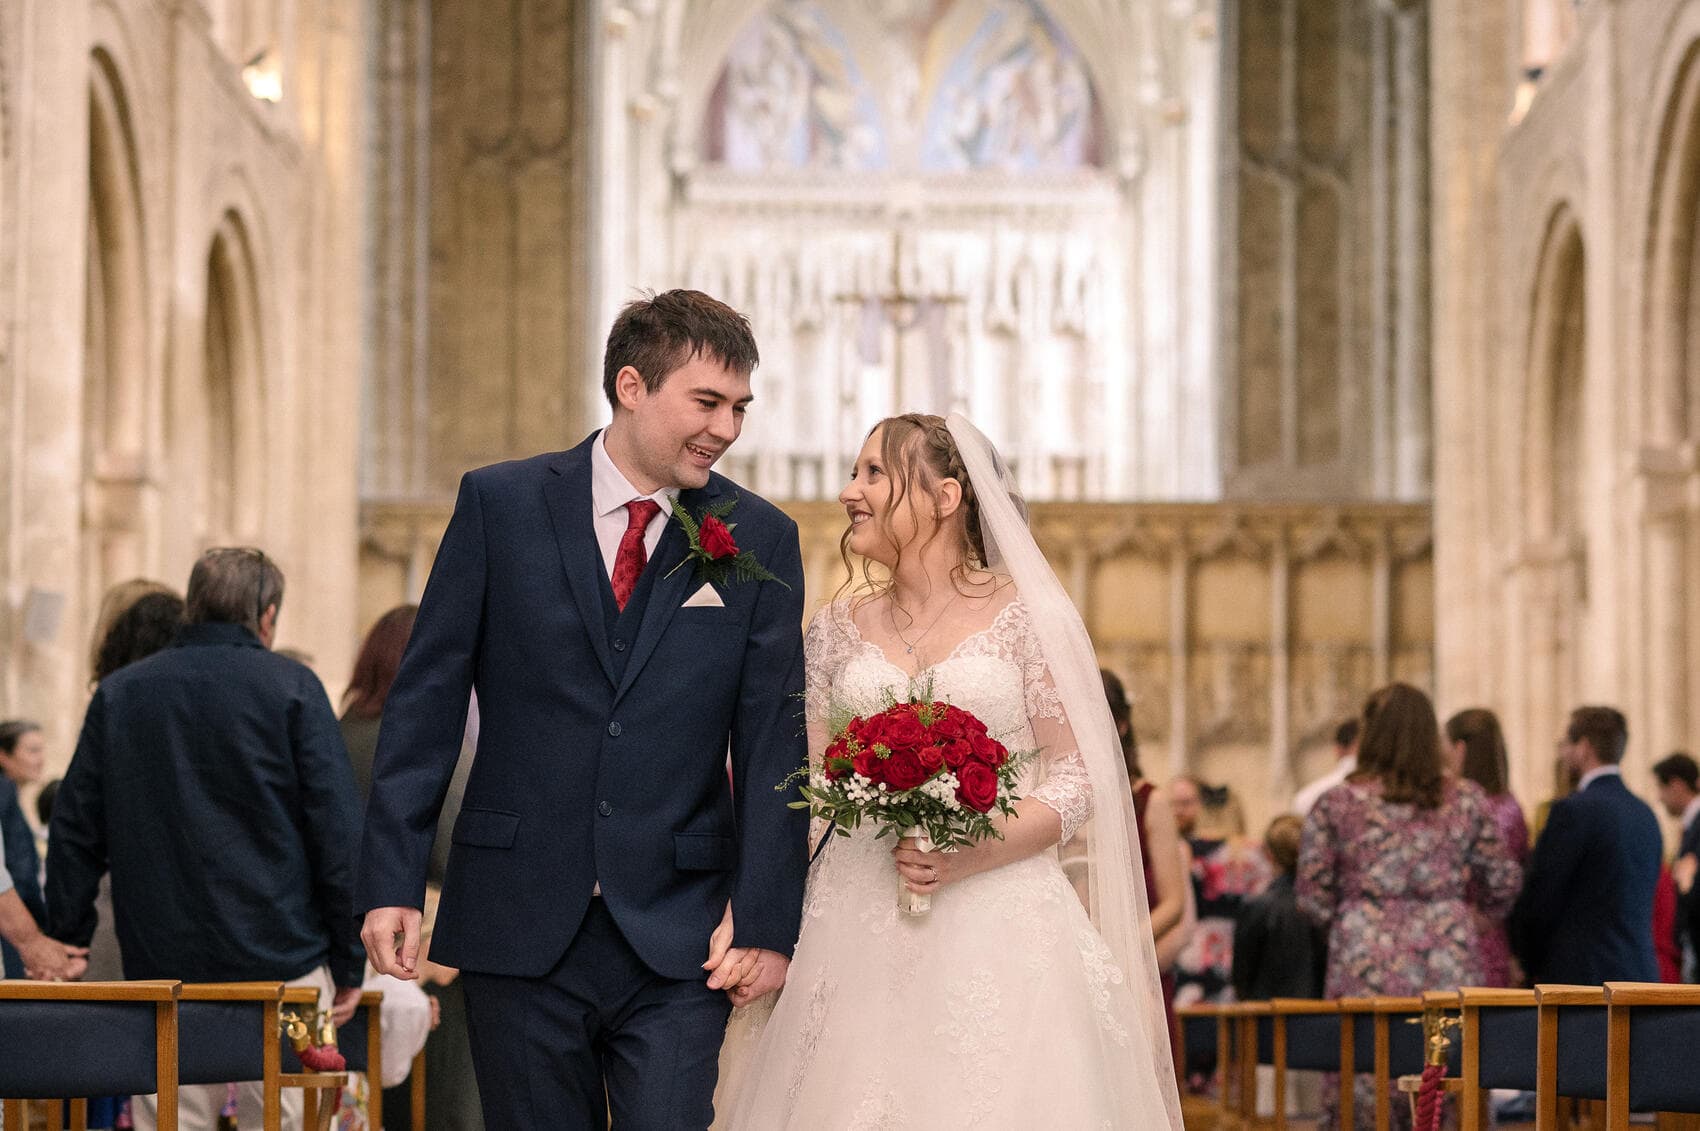 a loving look between the couple at Christchurch Priory wedding ceremony